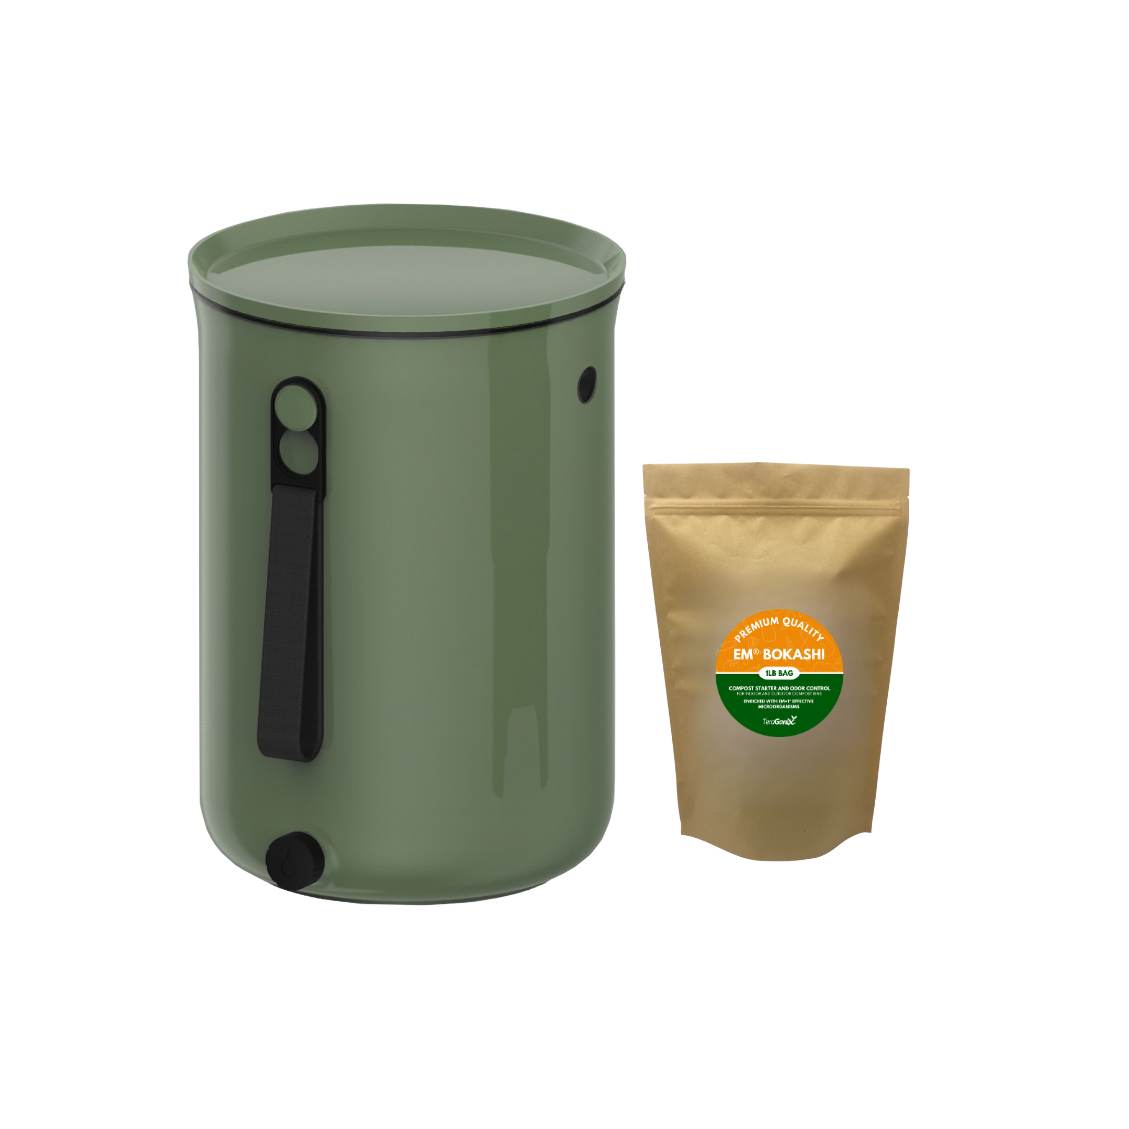 Kitchen Compost Bin for Countertop & Indoor Use - Odorless Composting Bin  with Lid, Small to Large Food Waste Bucket - Eco-Friendly Organic Waste